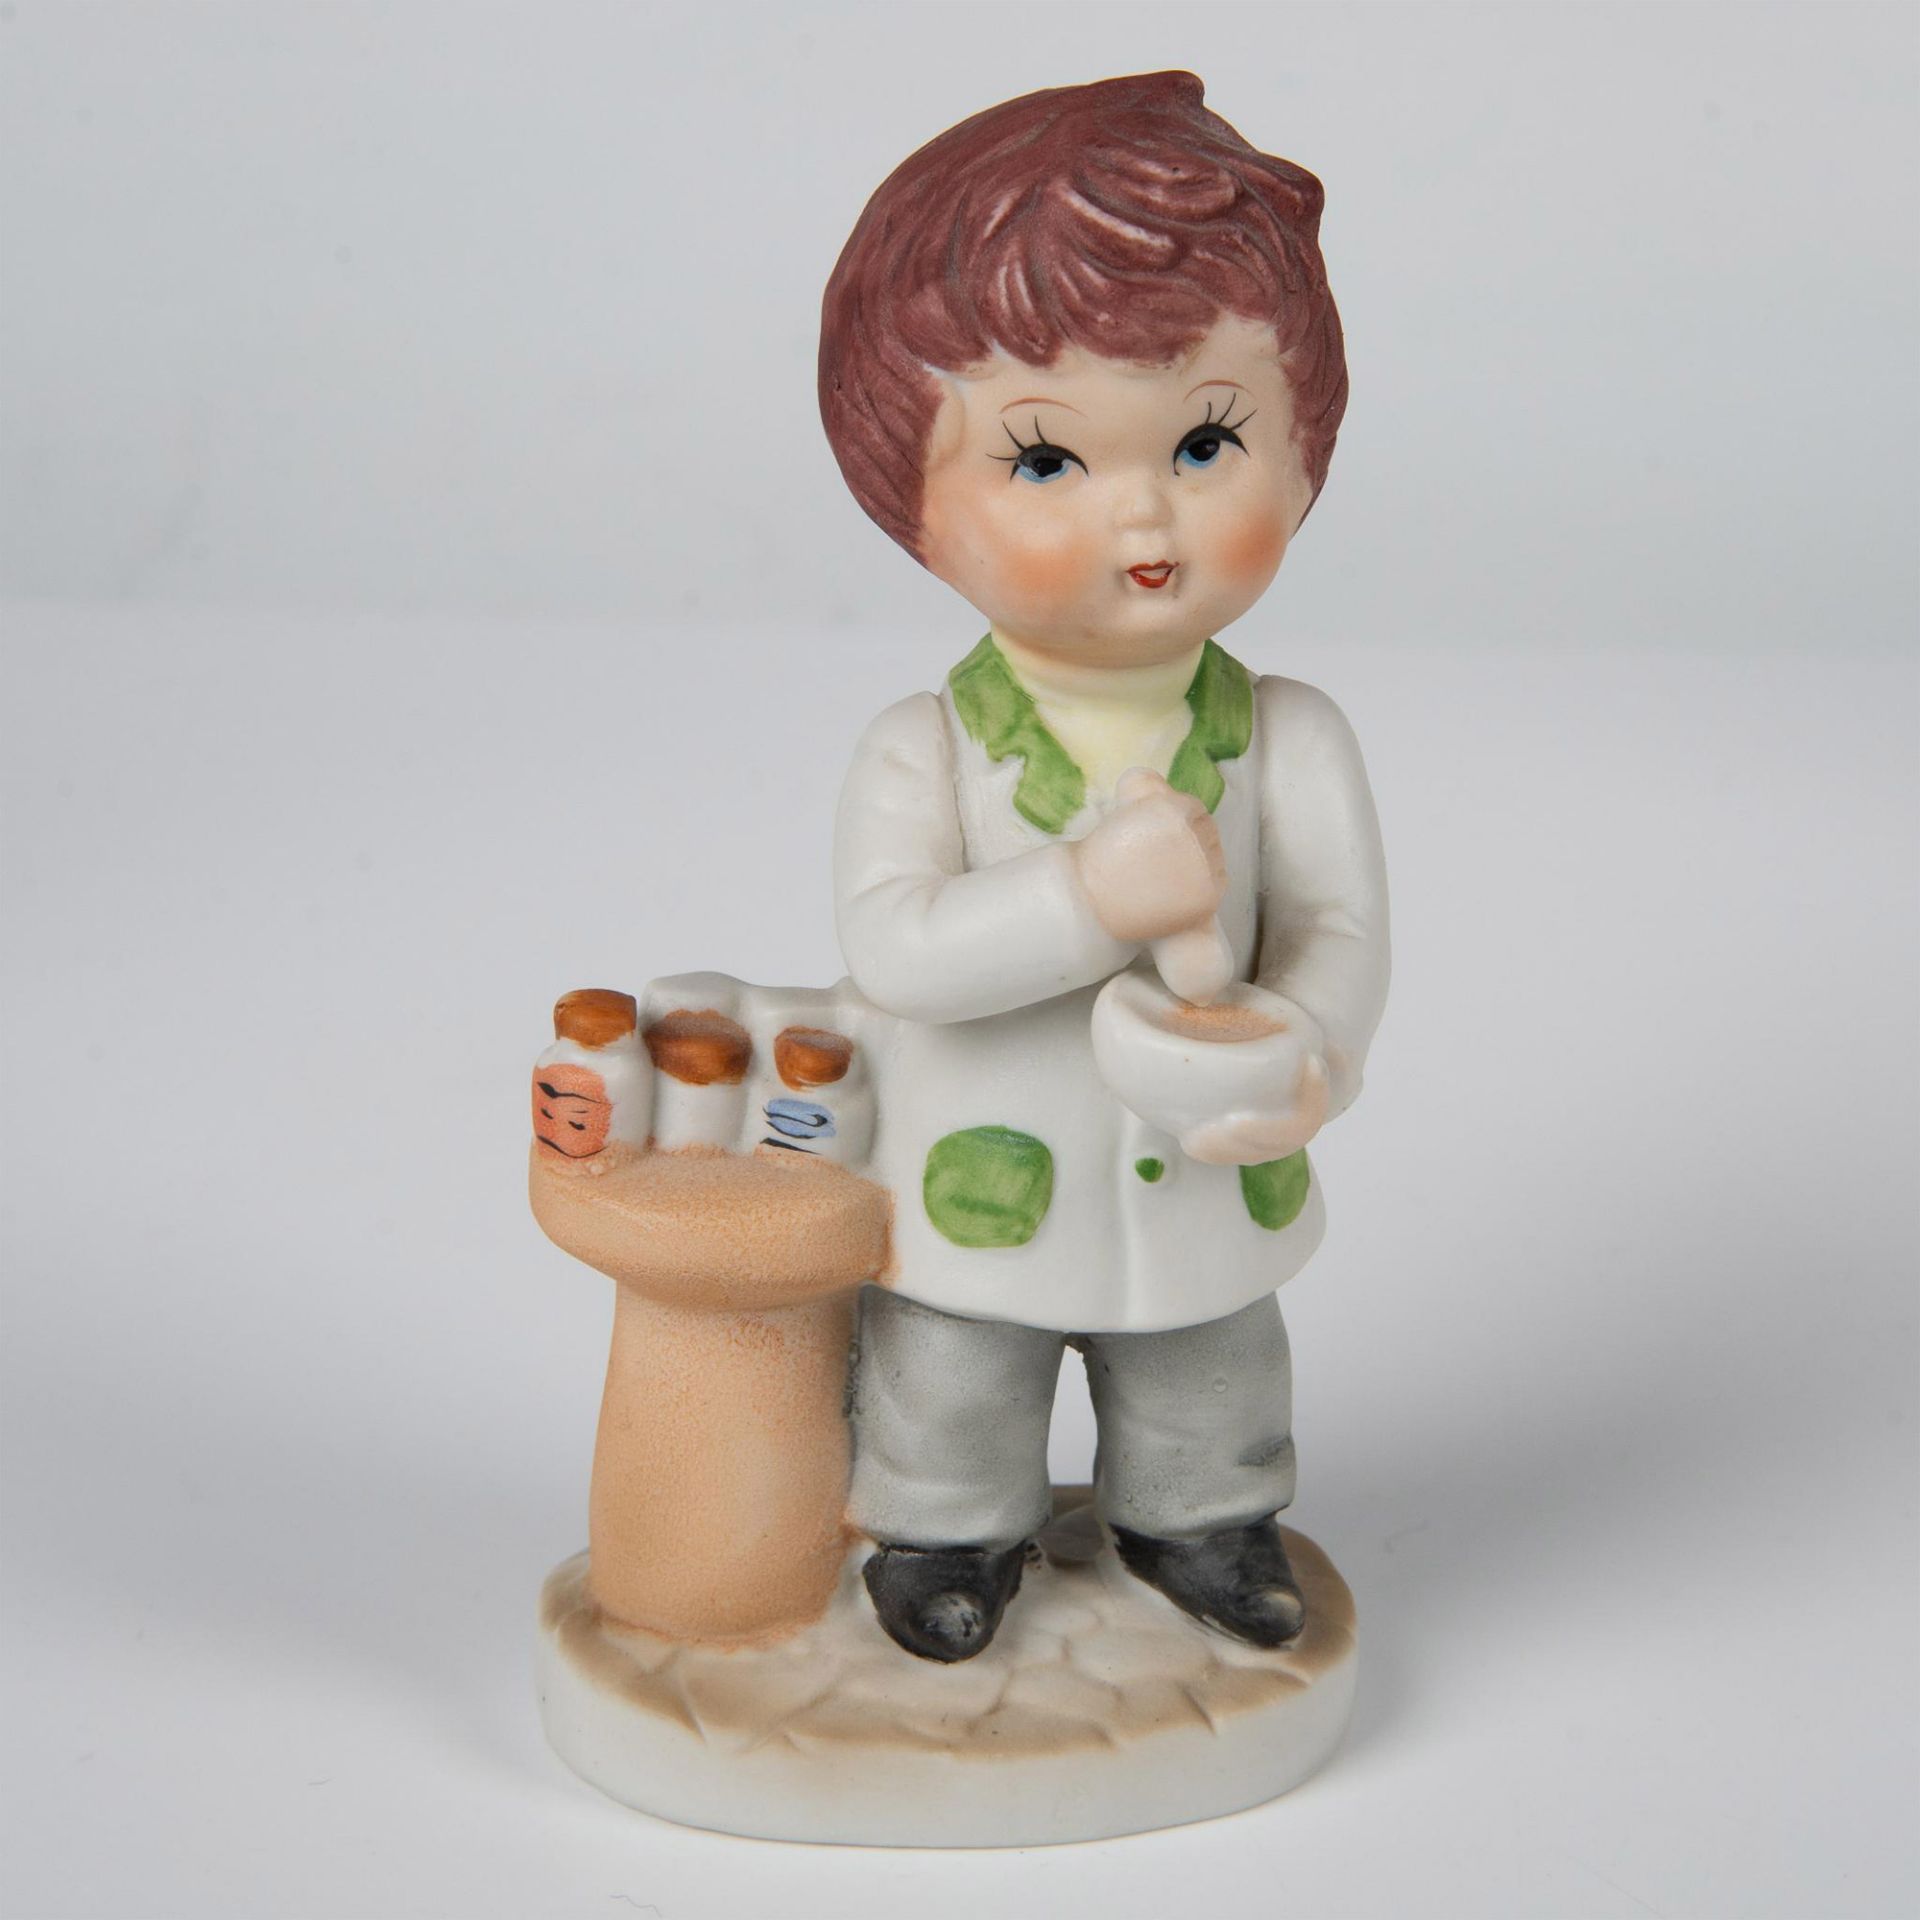 6pc Pharmacist Collectible Figurine Grouping - Image 9 of 14